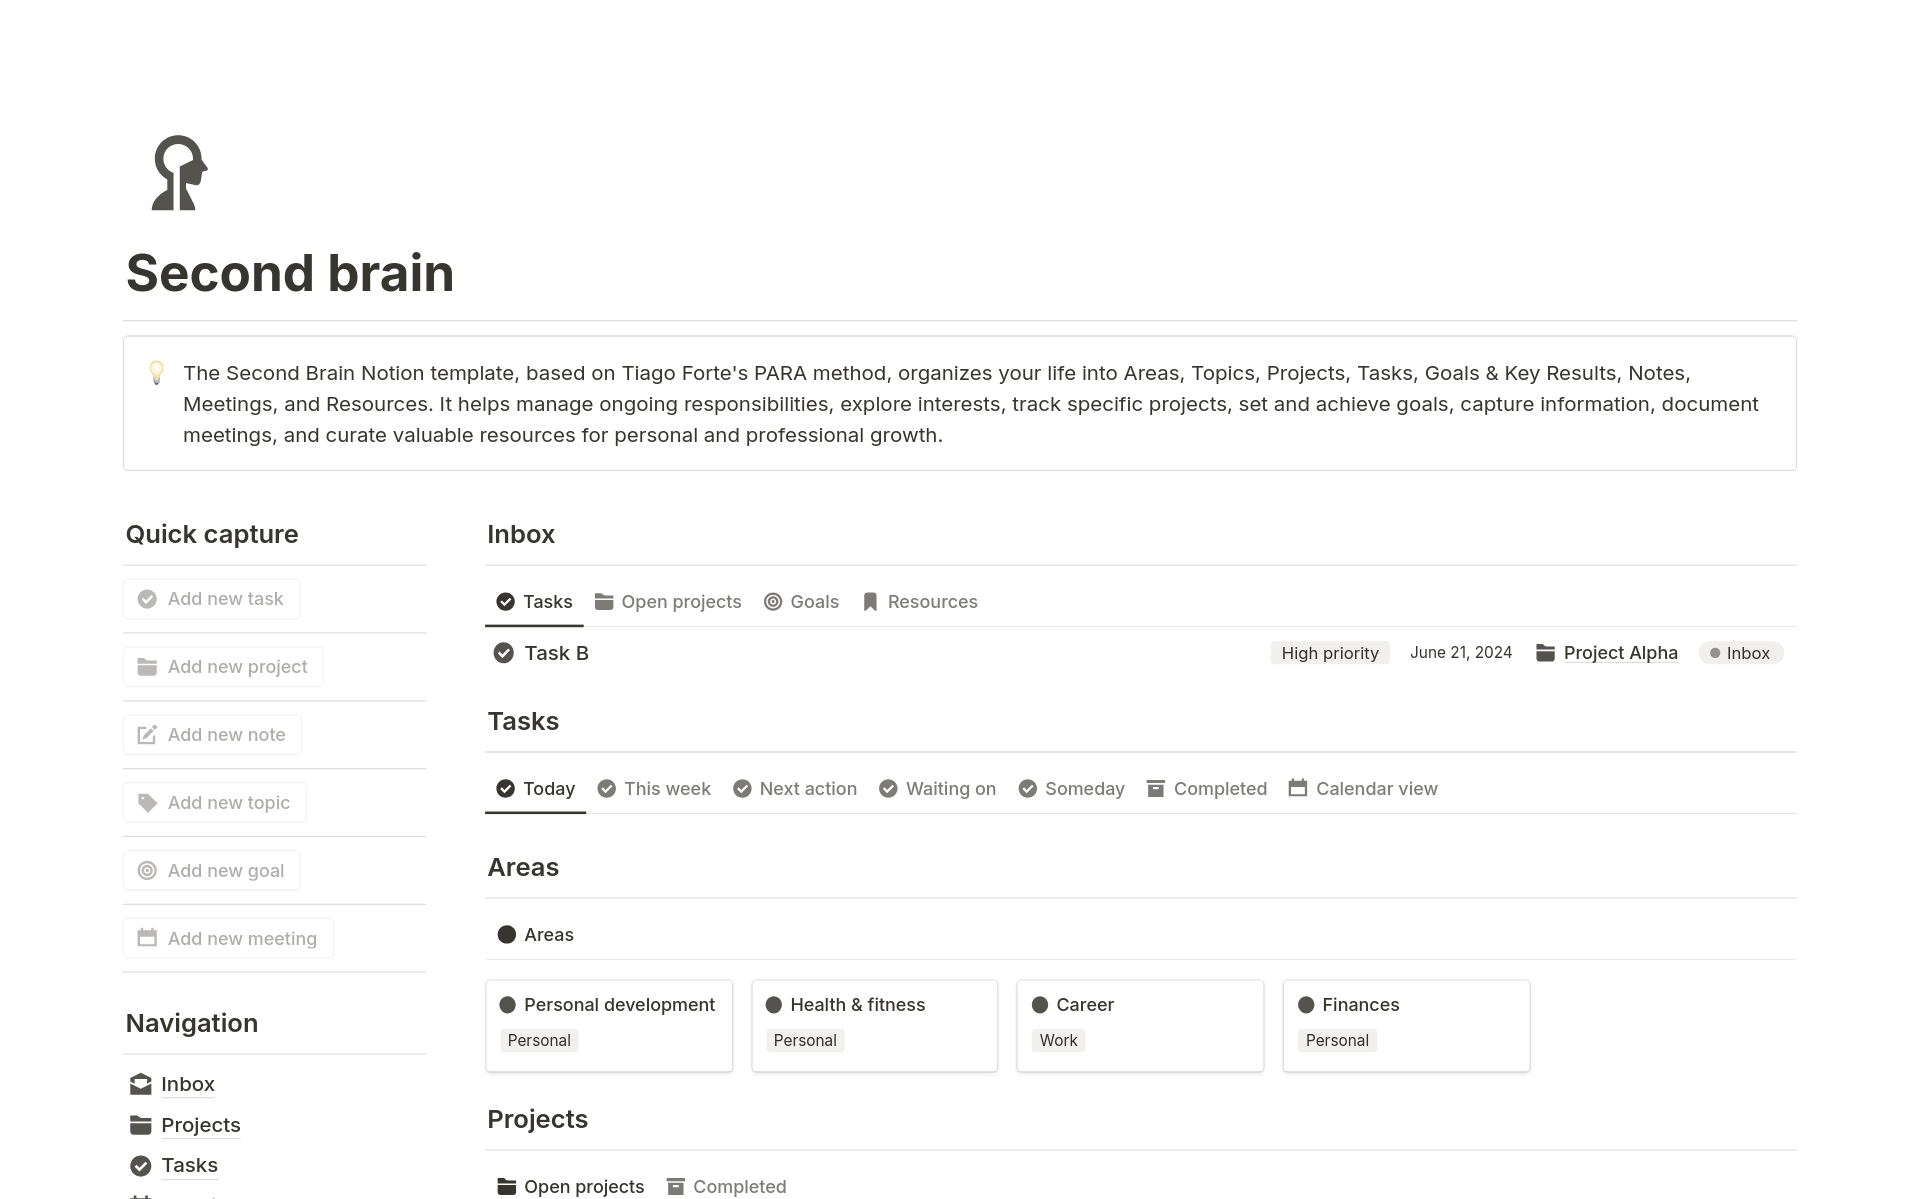 The Second Brain Notion template, based on Tiago Forte's PARA method, organizes your life into Areas, Topics, Projects, Tasks, Goals & Key Results, Notes, Meetings, and Resources.